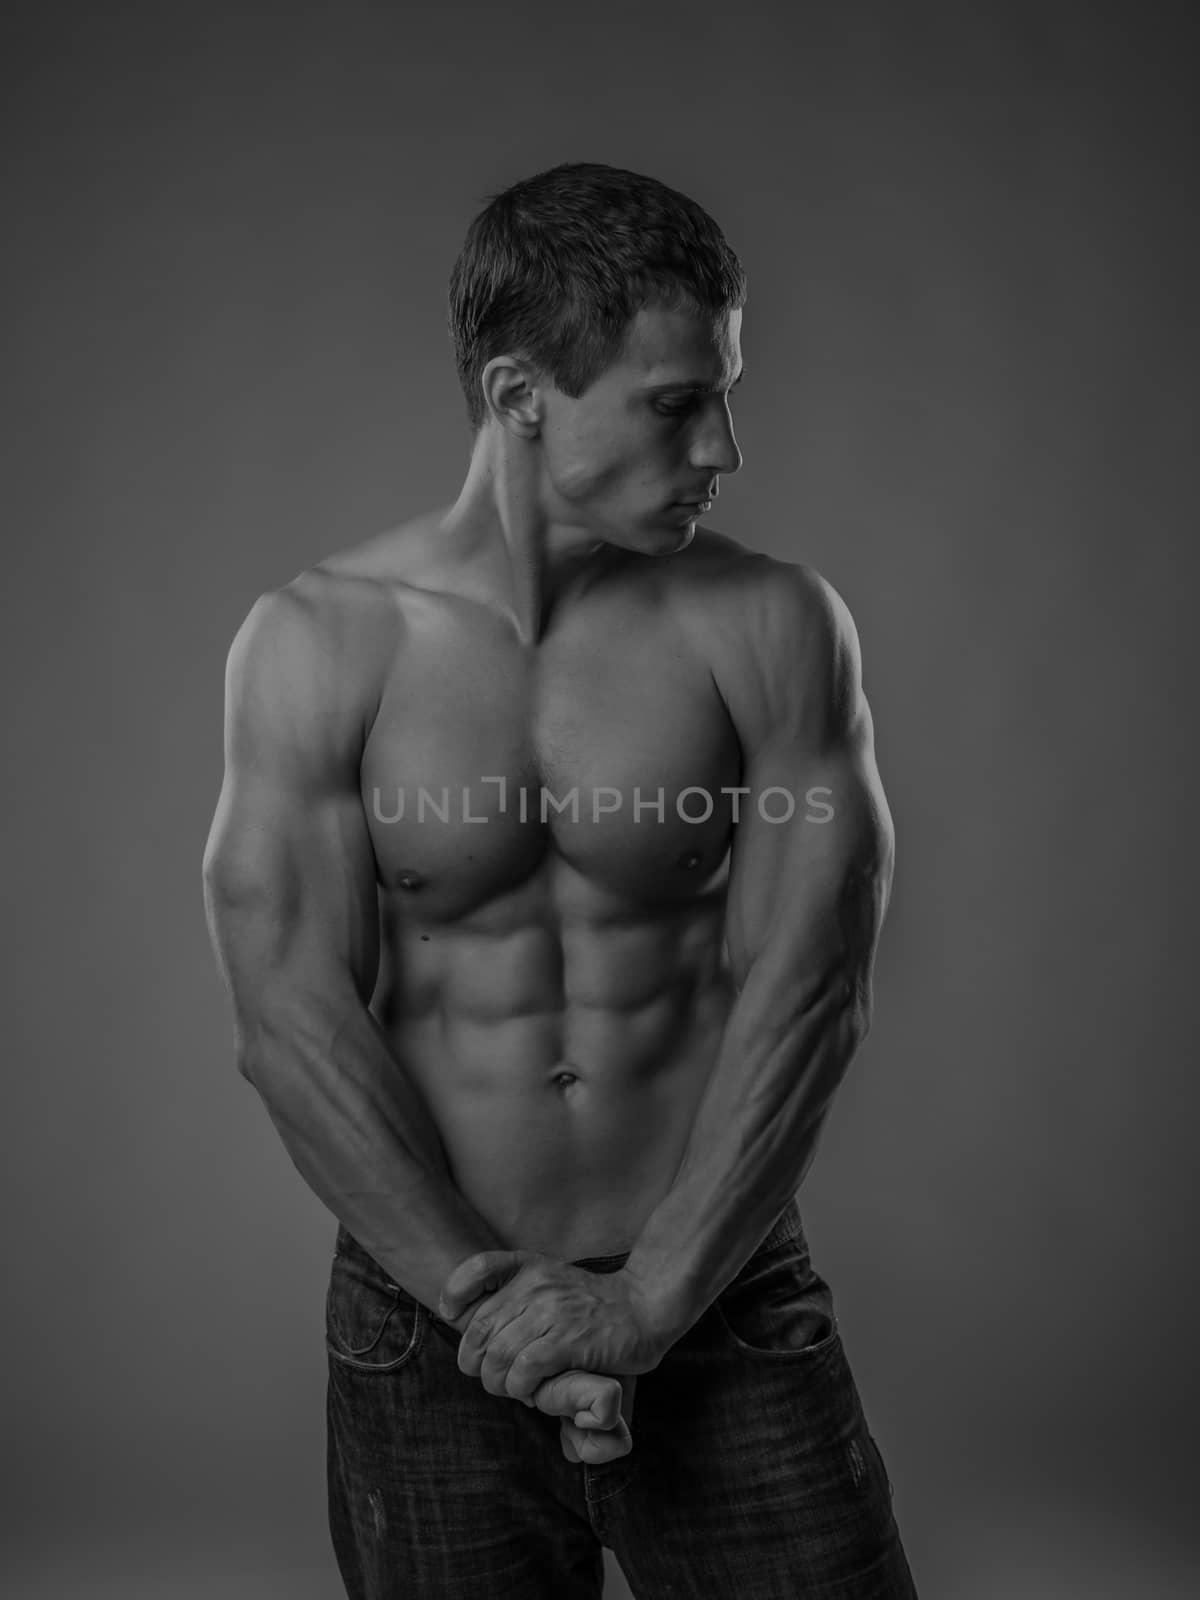 Muscular and fit young man posing shirtless